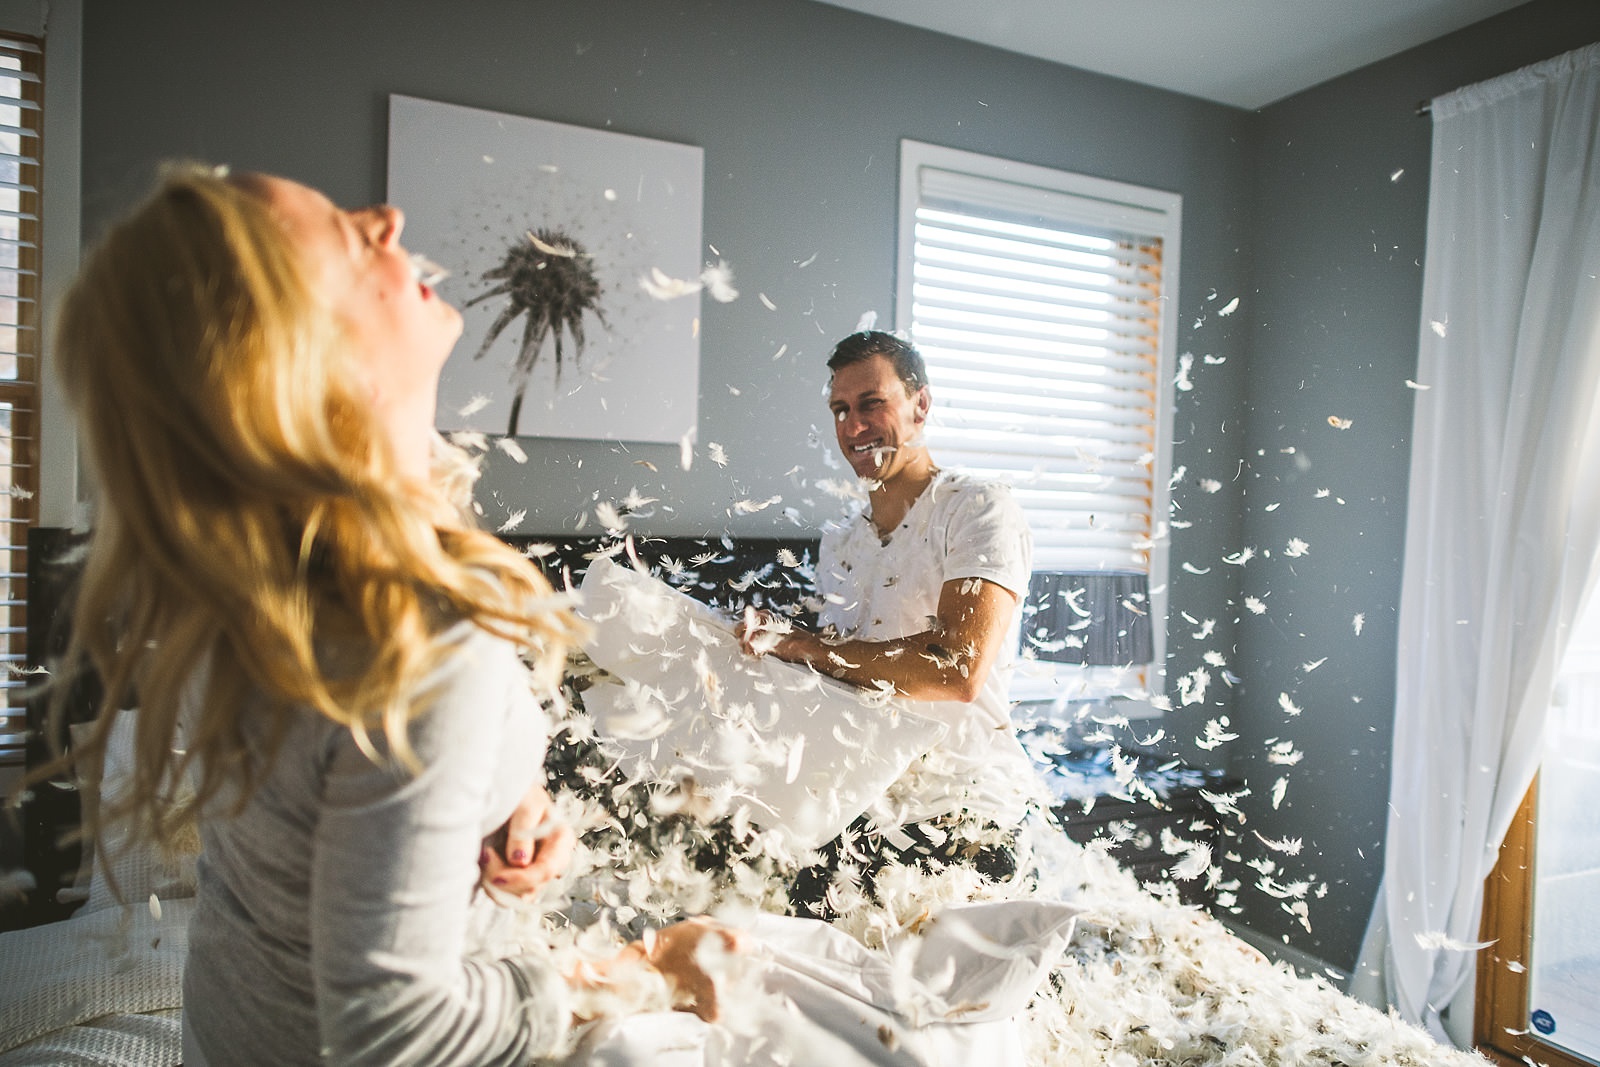 05 pillow fight engagement photos - Chicago In-home Engagement Sessions // Jessica + Bill